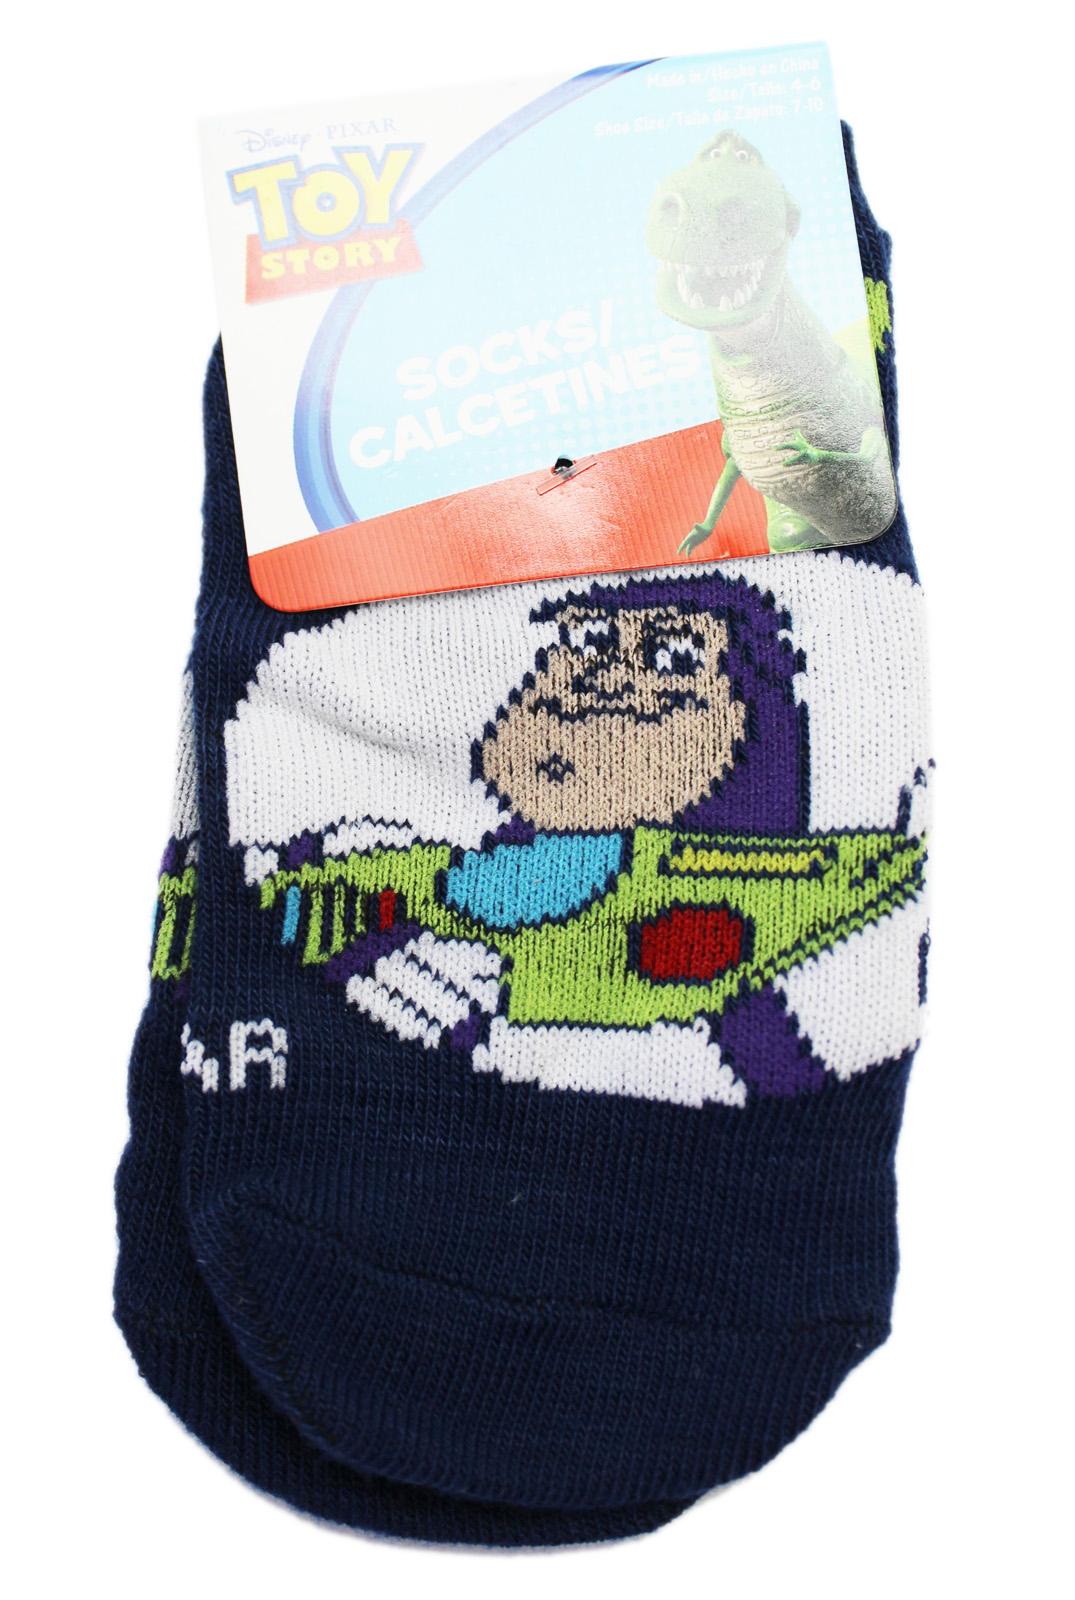 Disney Pixar's Toy Story Buzz Lightyear Navy Colored Socks (1 Pair, Size 4-6) - image 1 of 1